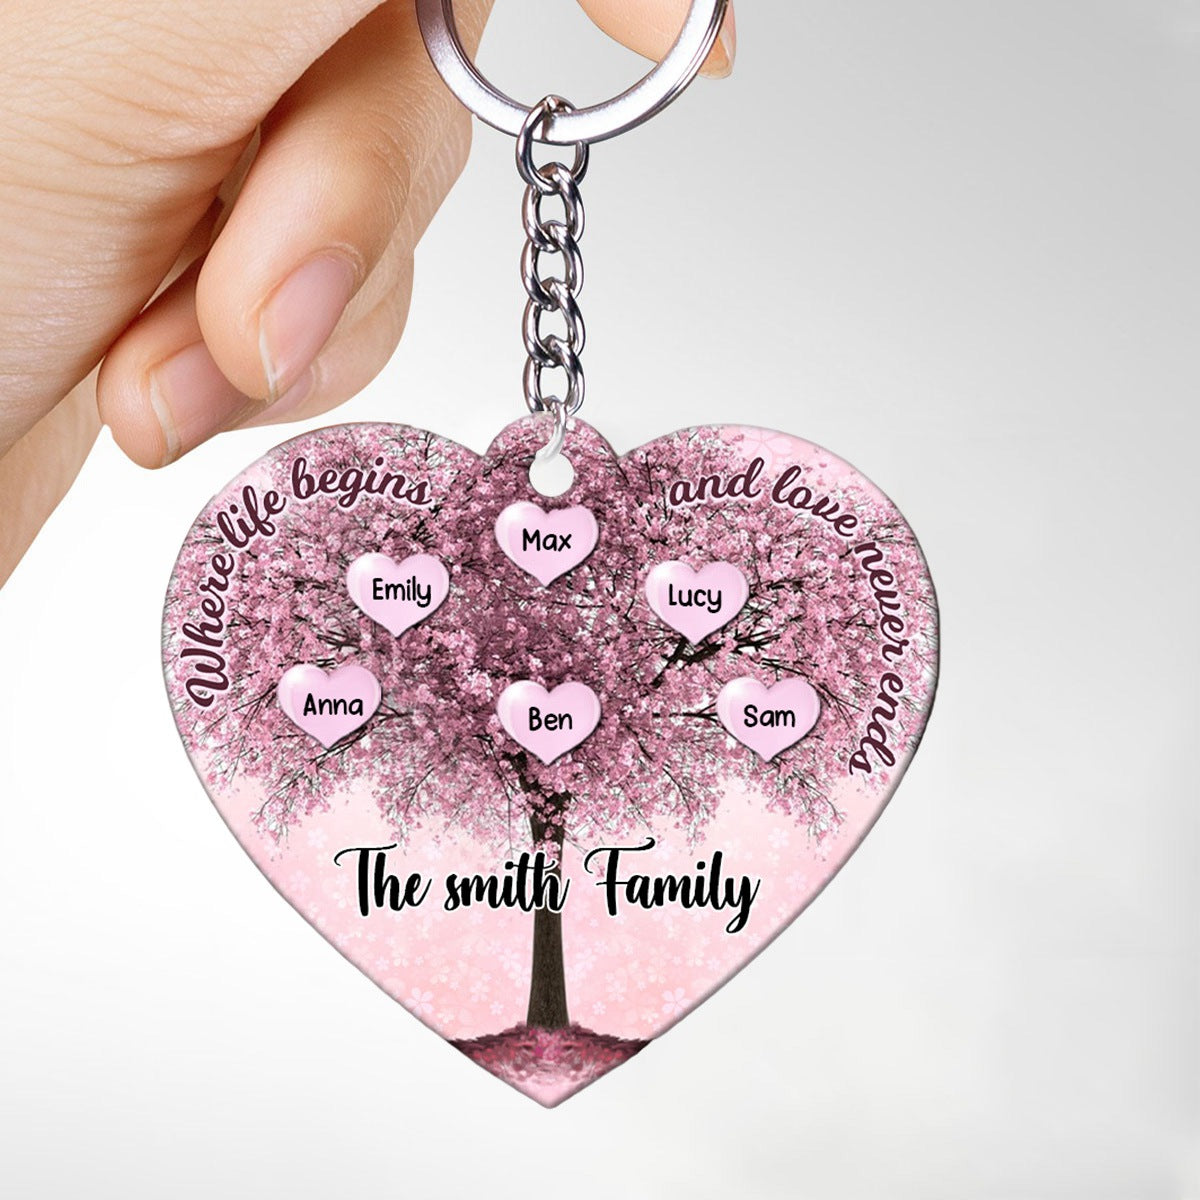 Personalized Family Tree Acrylic Keychain - Where Life Begins & Love Never Ends